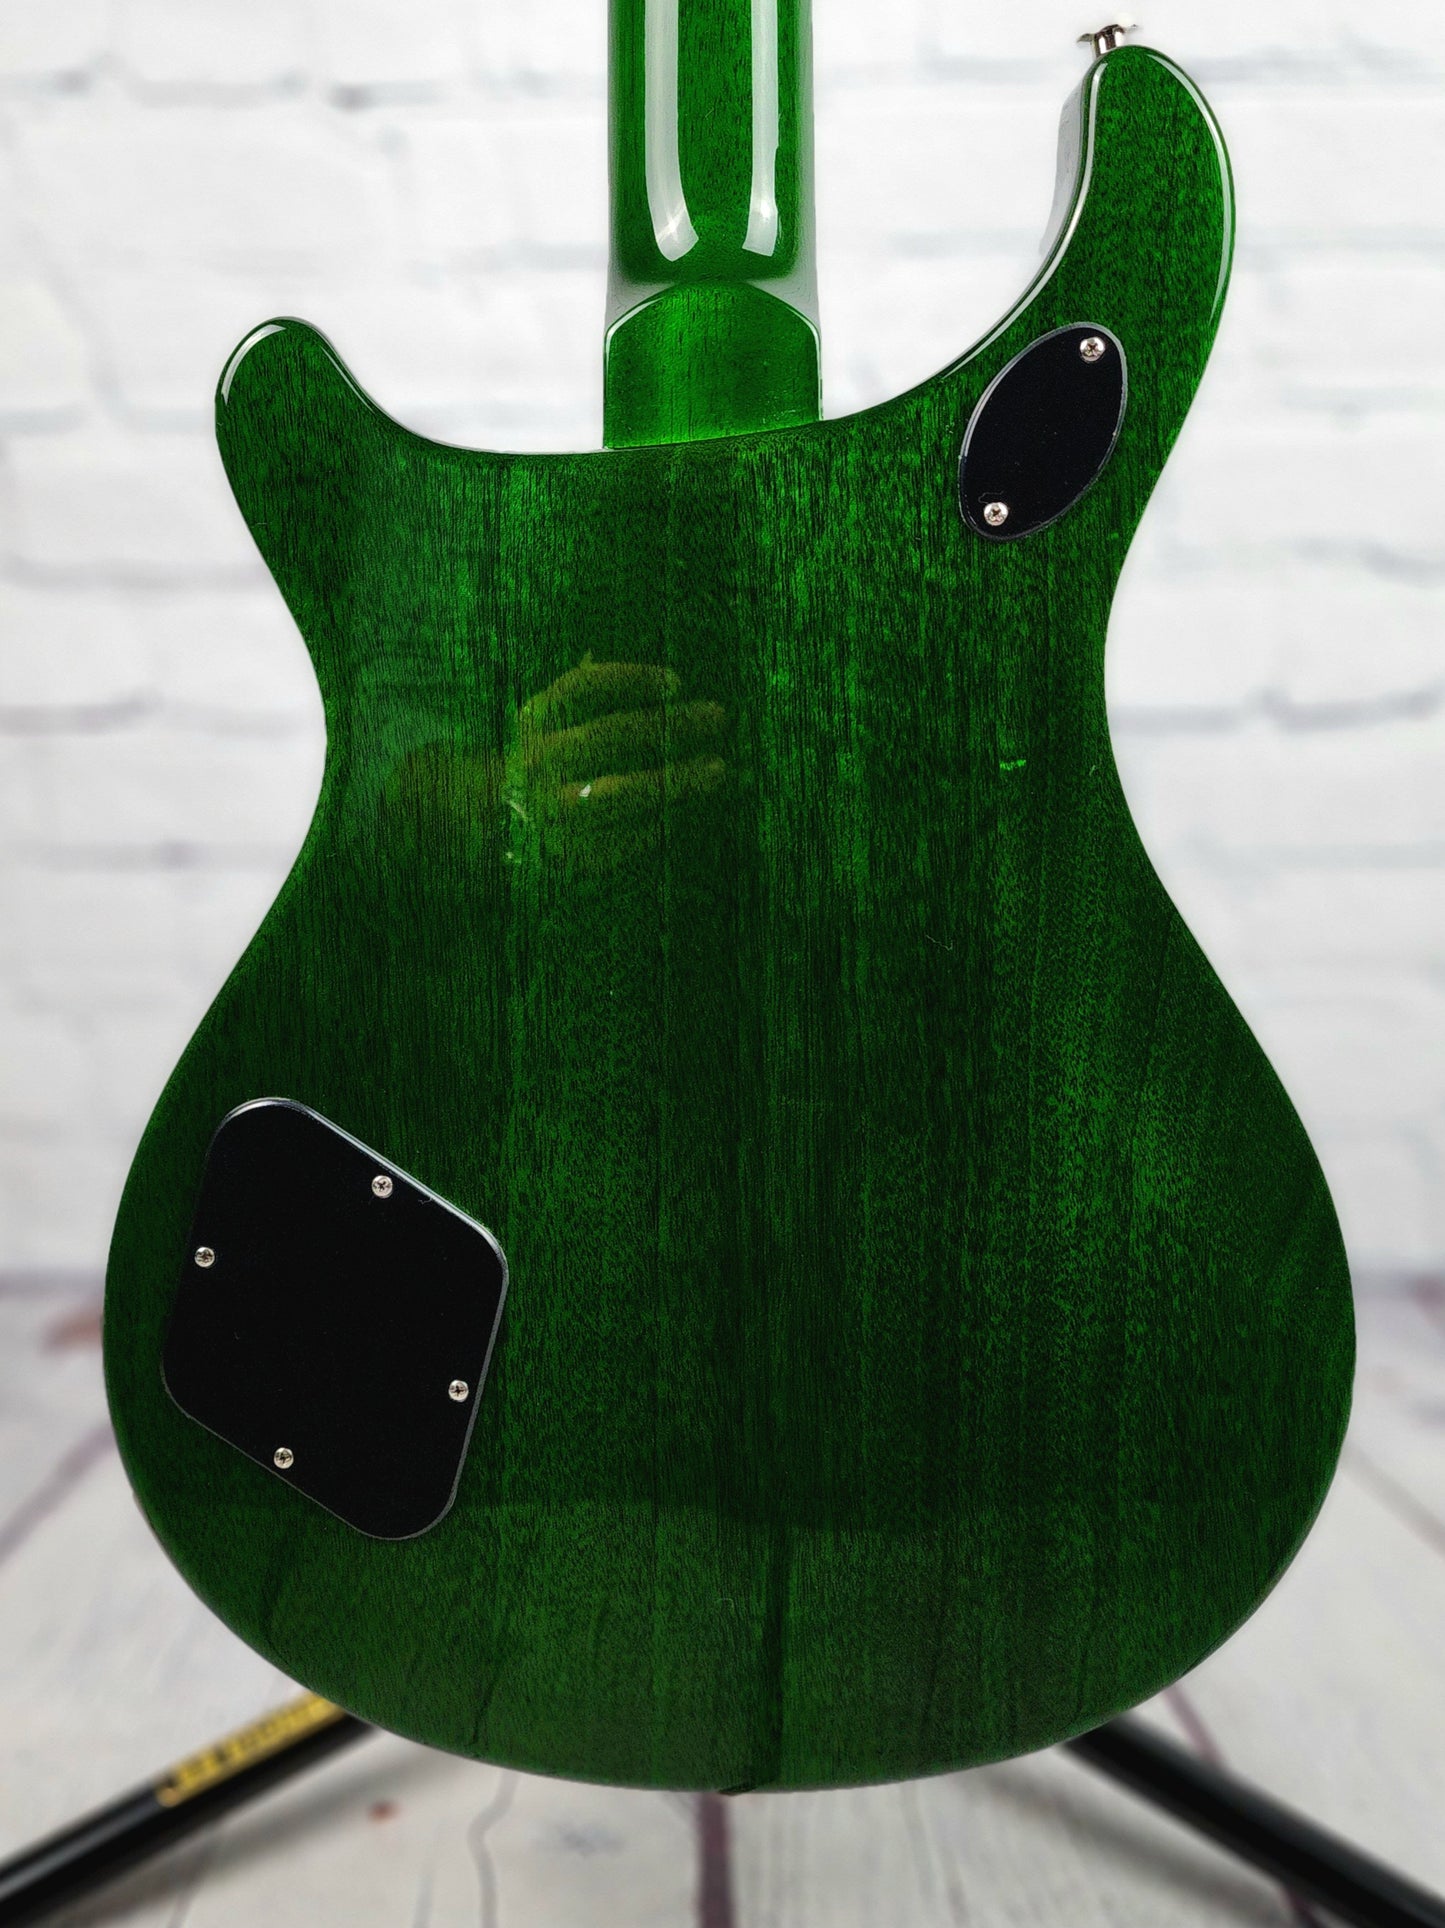 Paul Reed Smith PRS S2 McCarty 594 Electric Guitar Eriza Verde